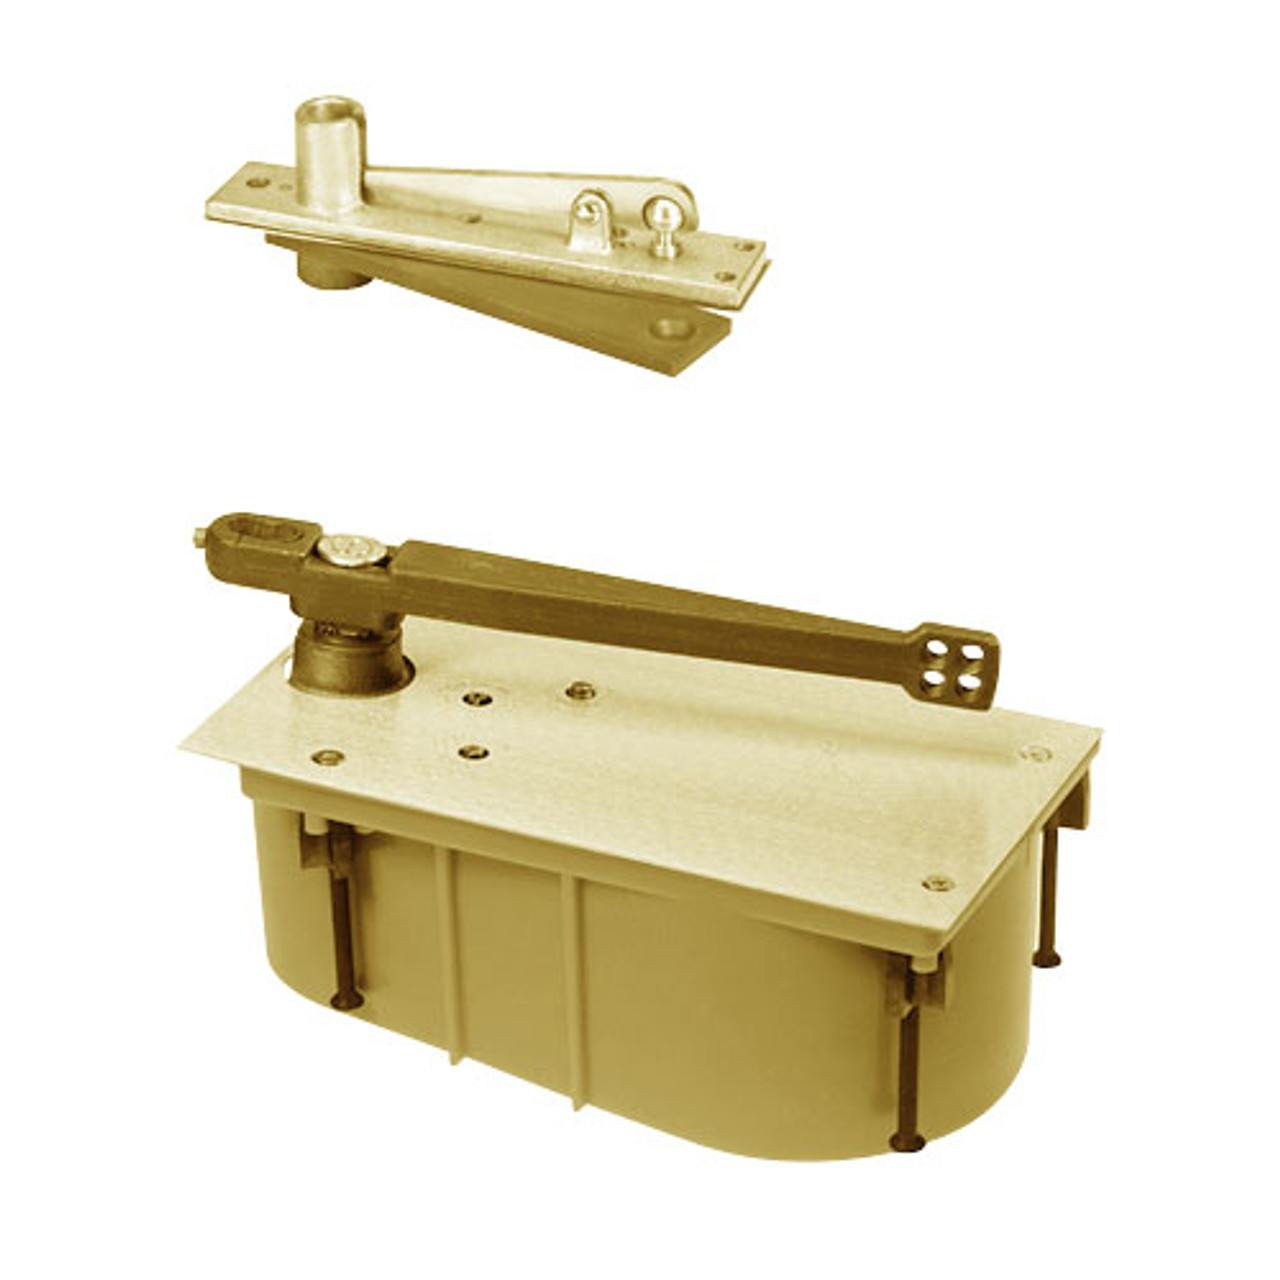 28-95S-LH-606 Rixson 28 Series Heavy Duty Single Acting Center Hung Floor Closer in Satin Brass Finish